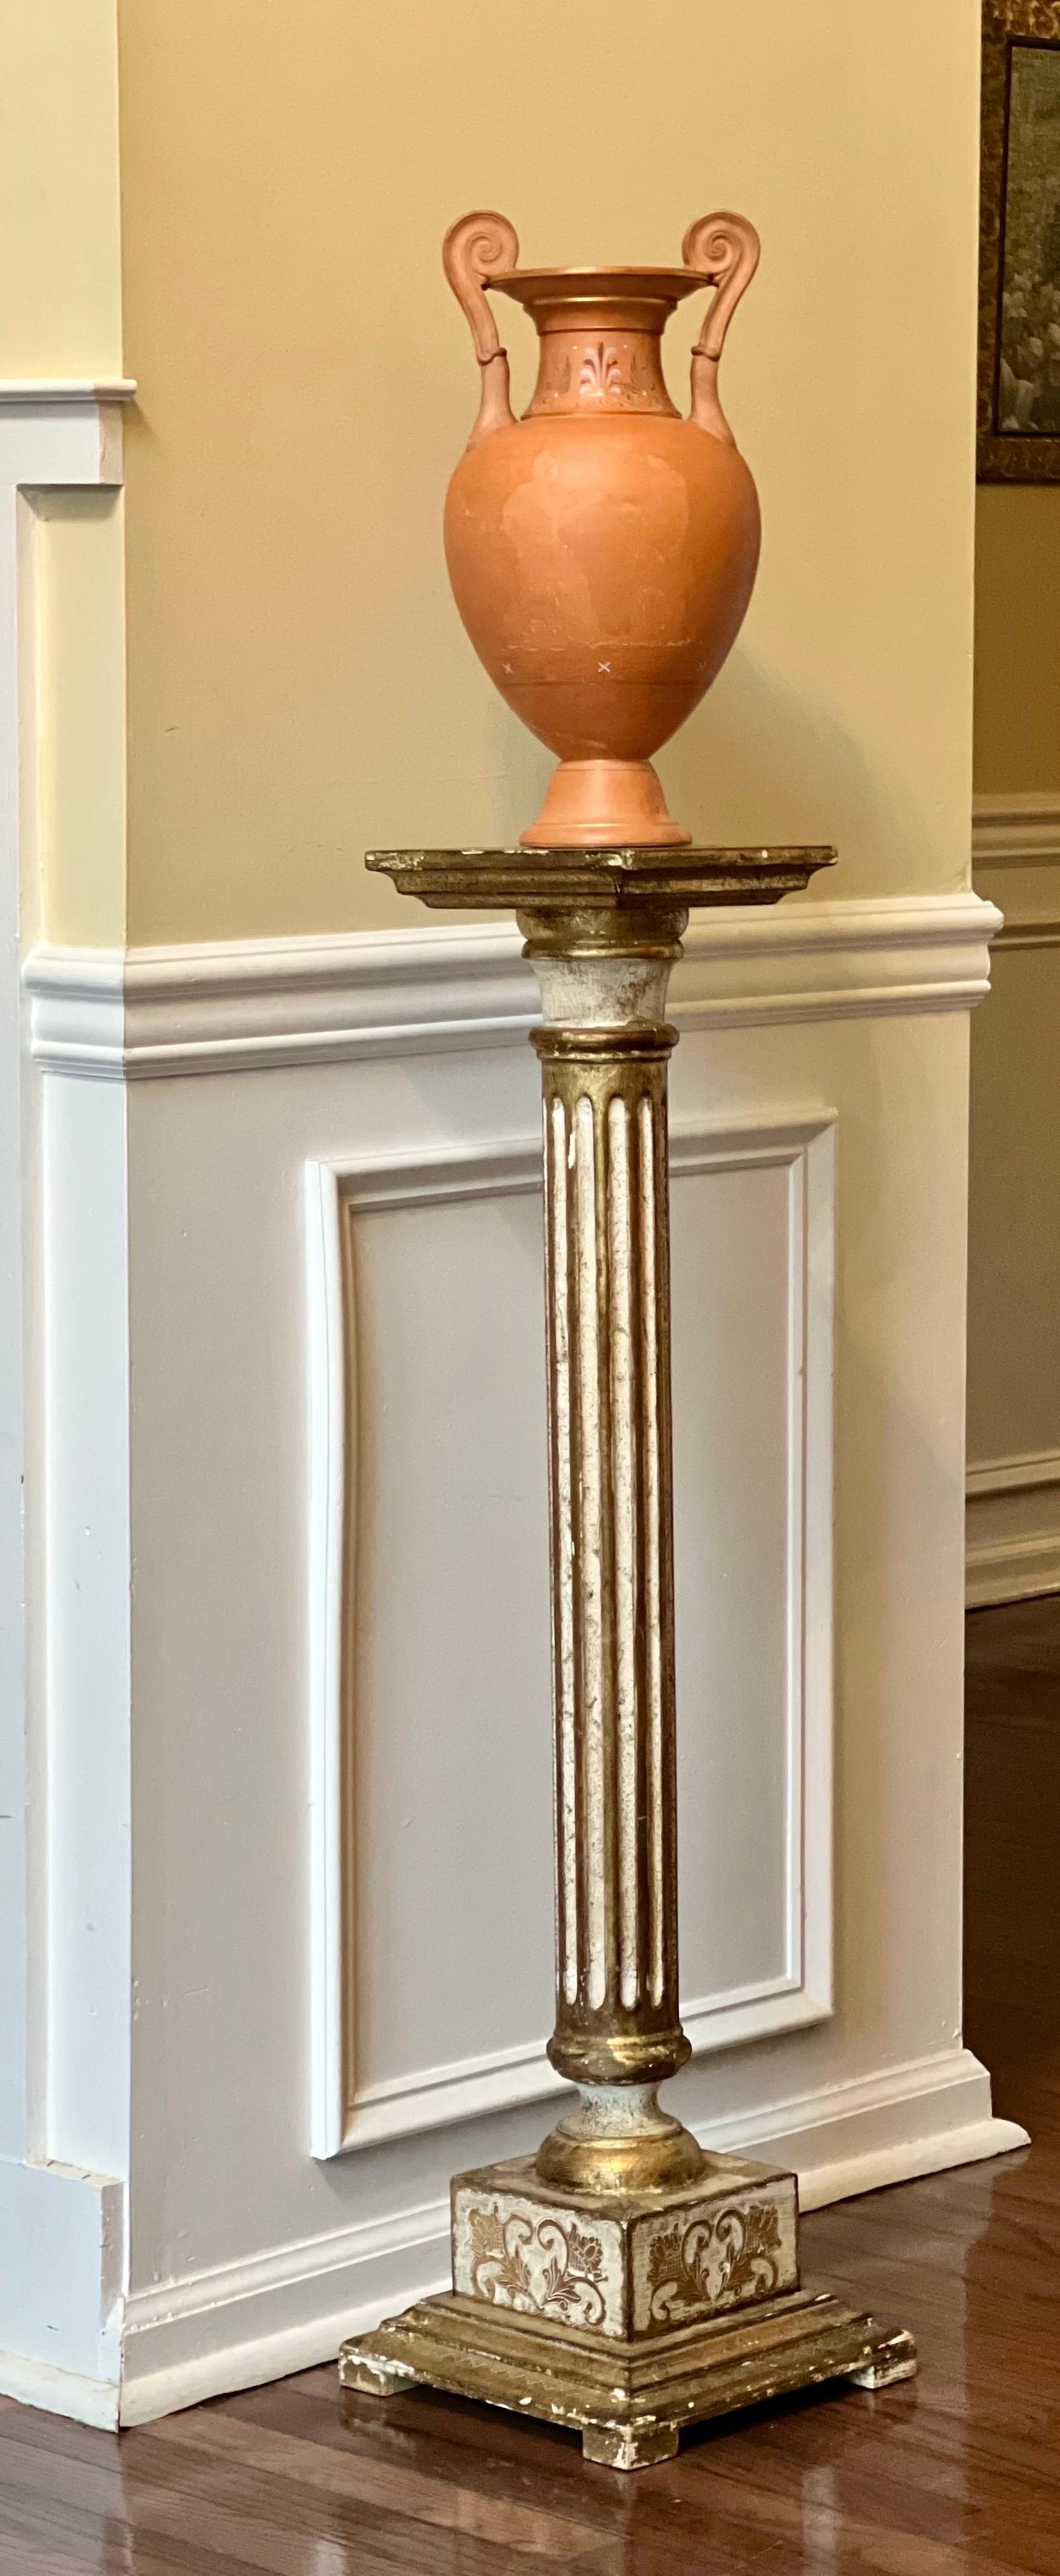 Florentine Neoclassical Fluted Cream and Gold Gilt Painted Column Pedestal For Sale 6